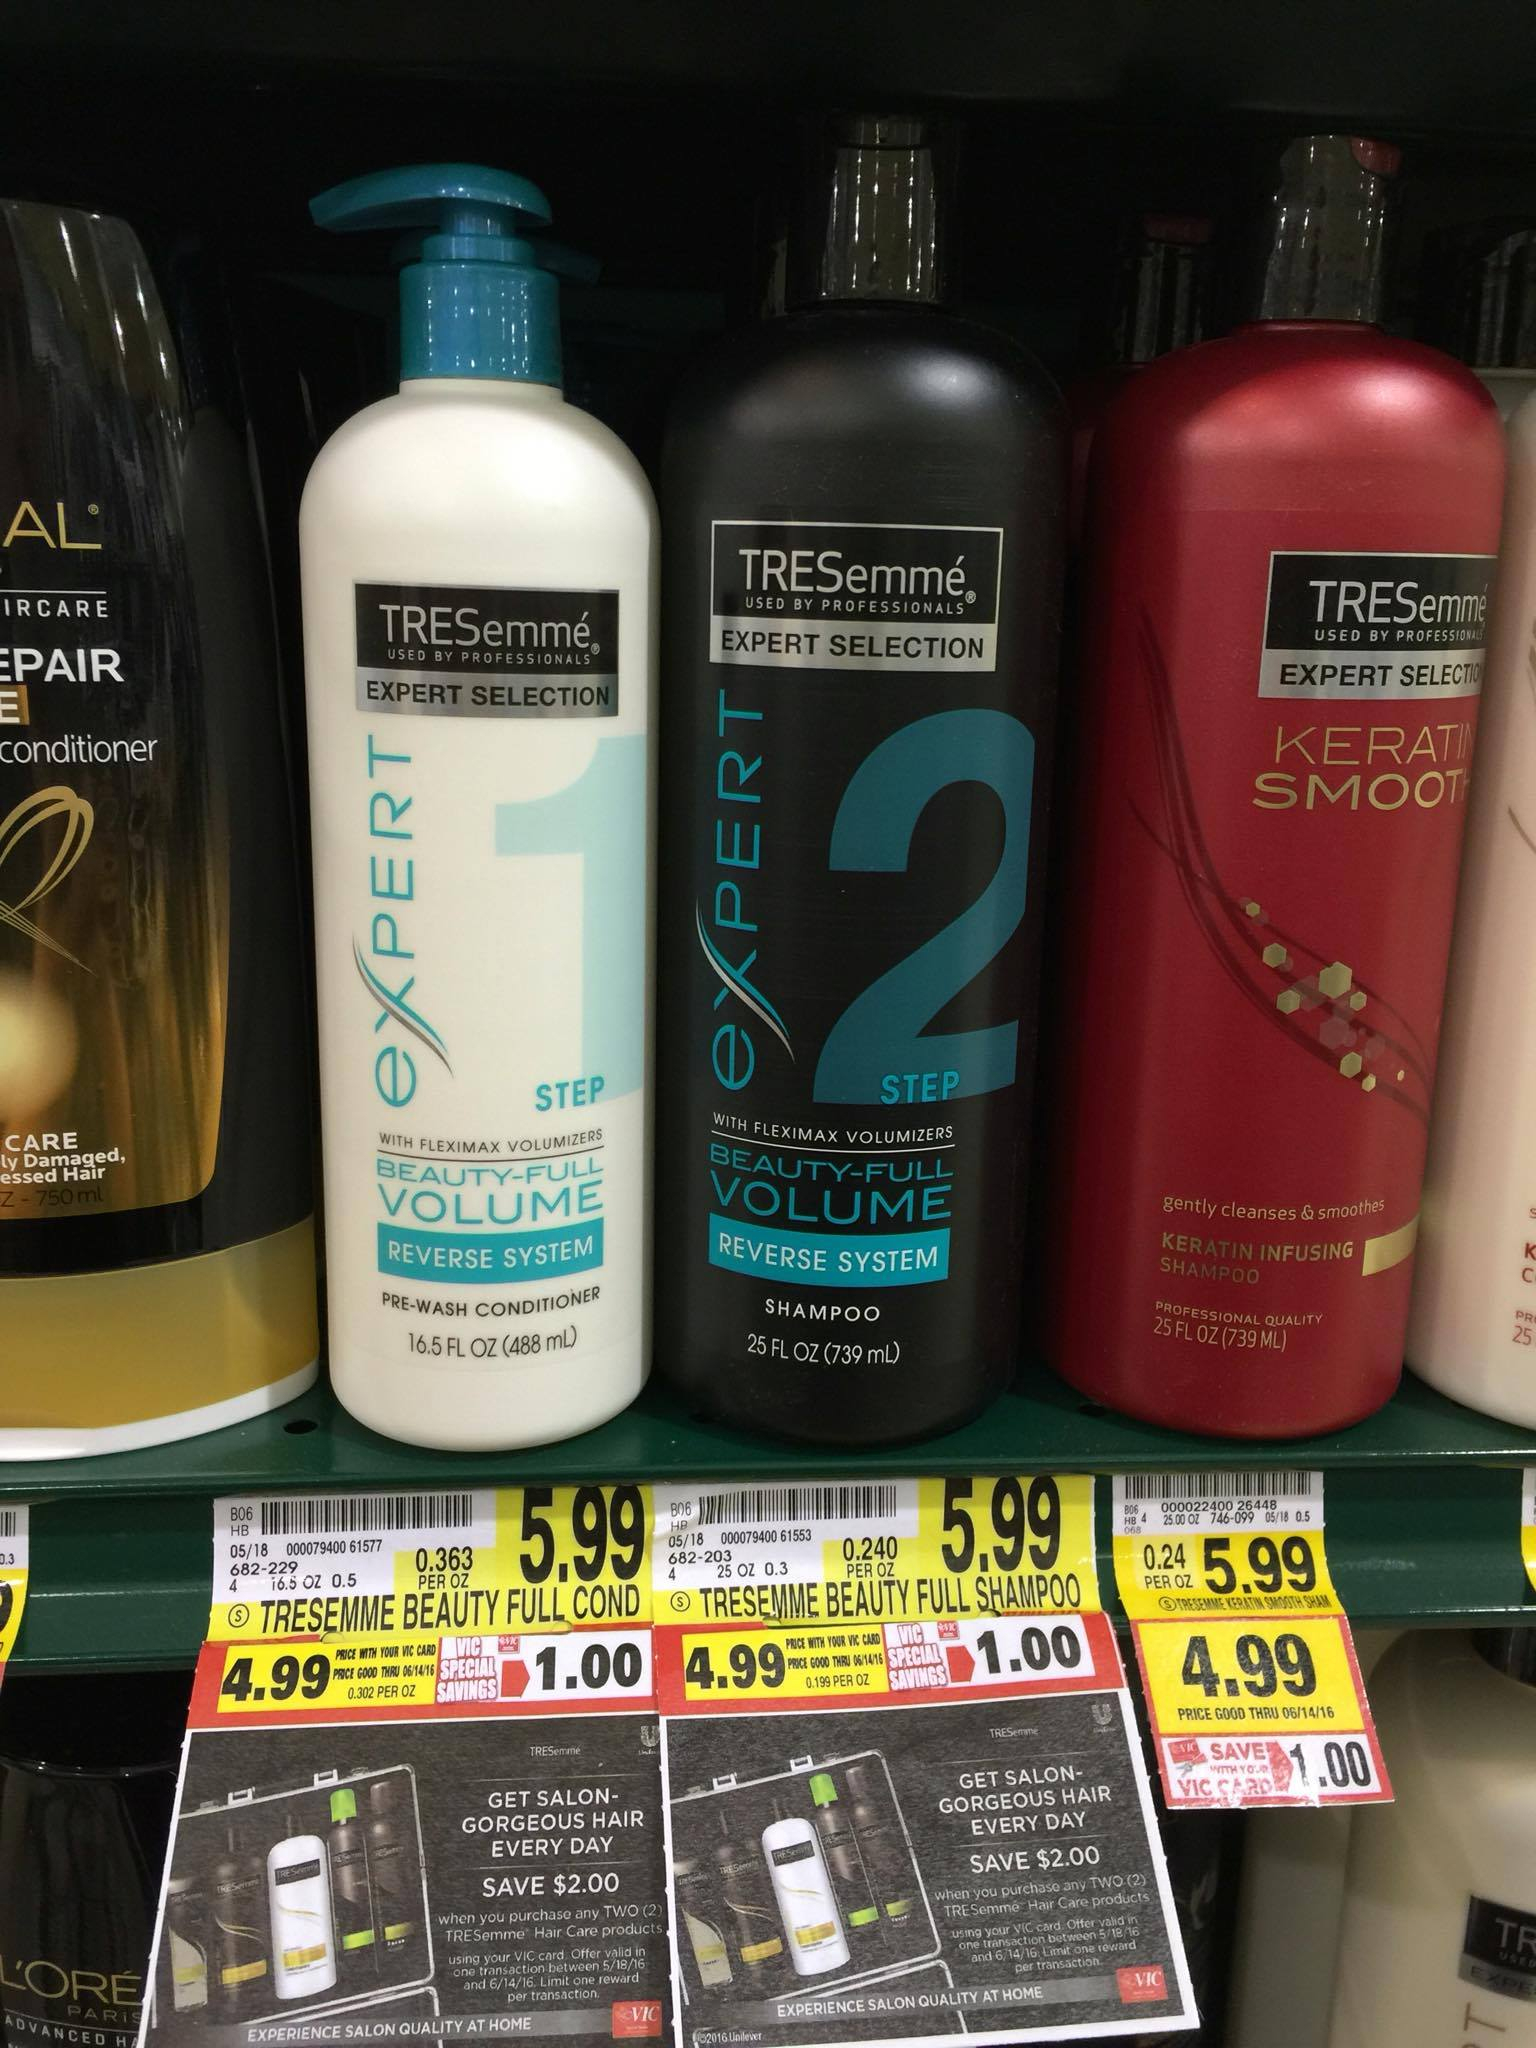 Possibly? Free Tresemme Expert Reverse System! - The Harris Teeter Deals - Free Printable Tresemme Coupons